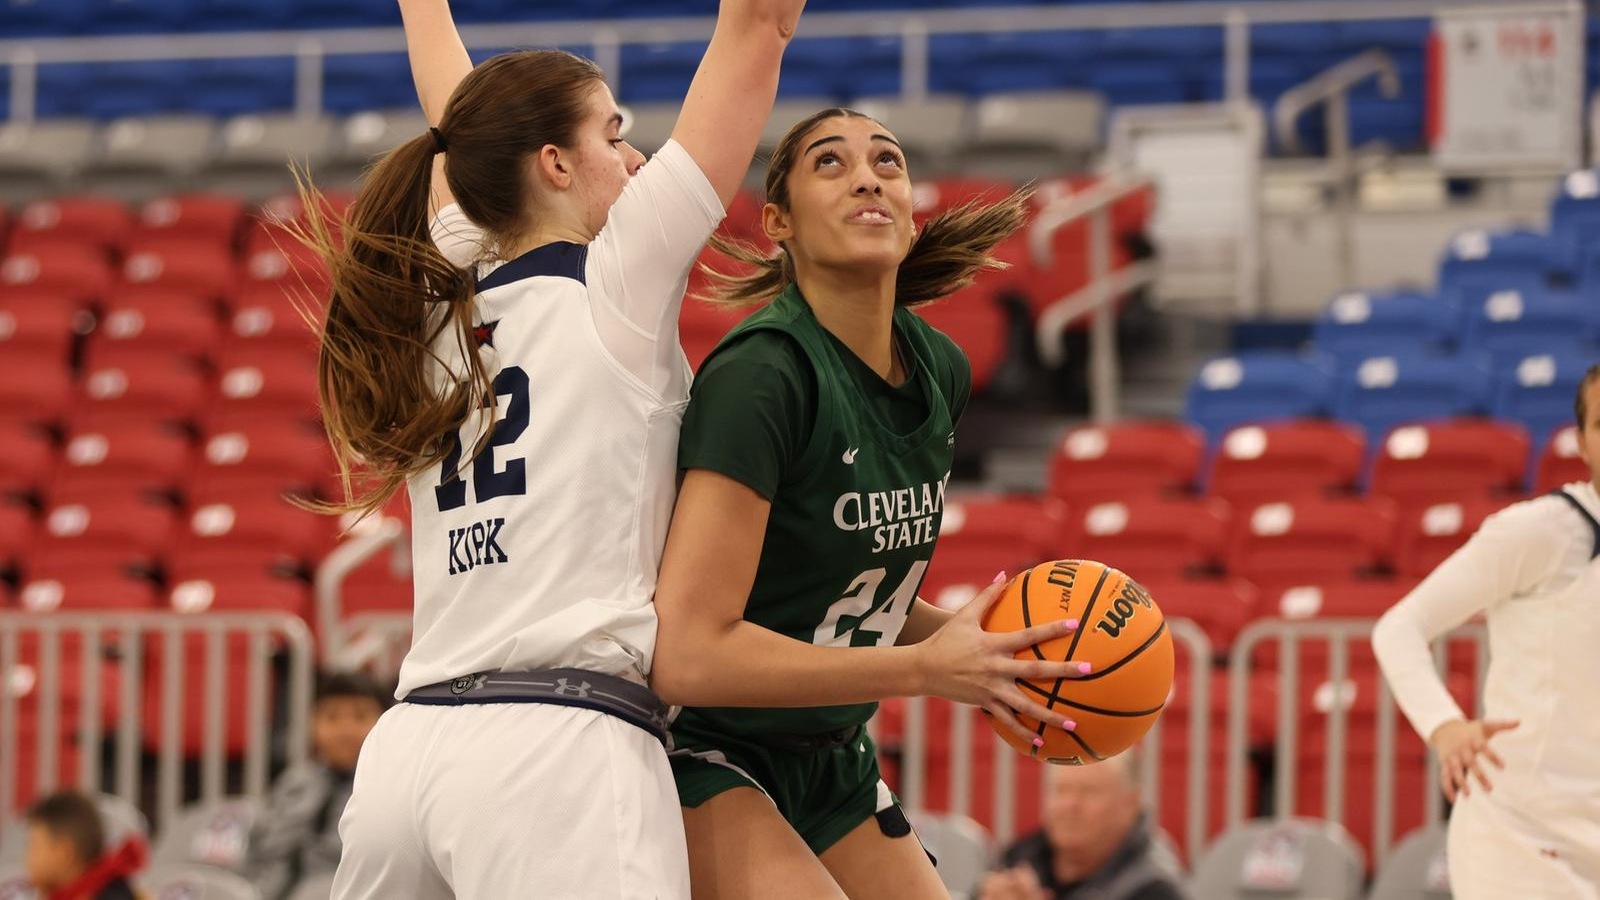 Cleveland State Women’s Basketball Cruises To 79-40 Victory At RMU